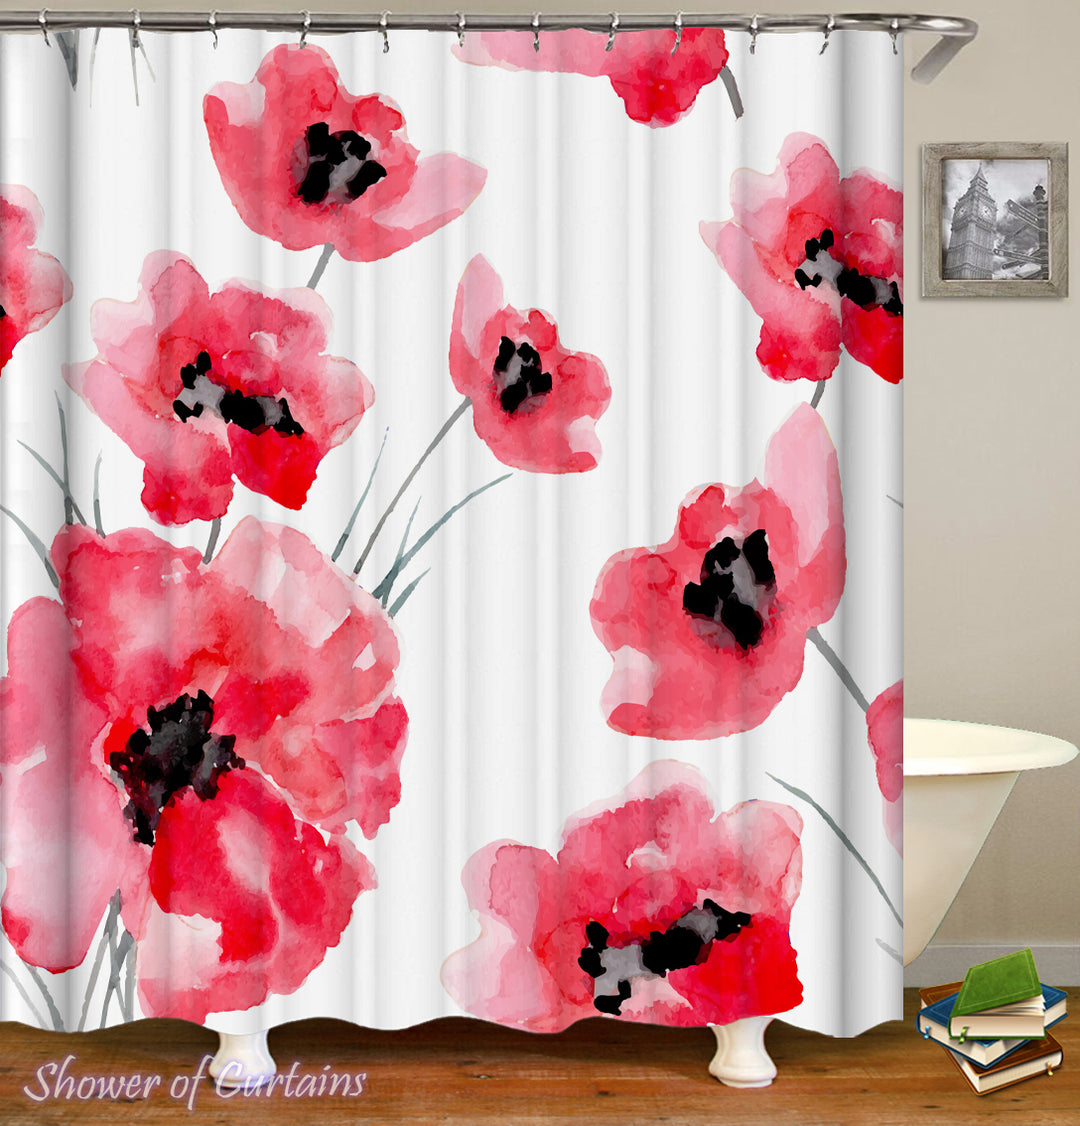 Watercolor Poppy Seed Flowers shower curtain